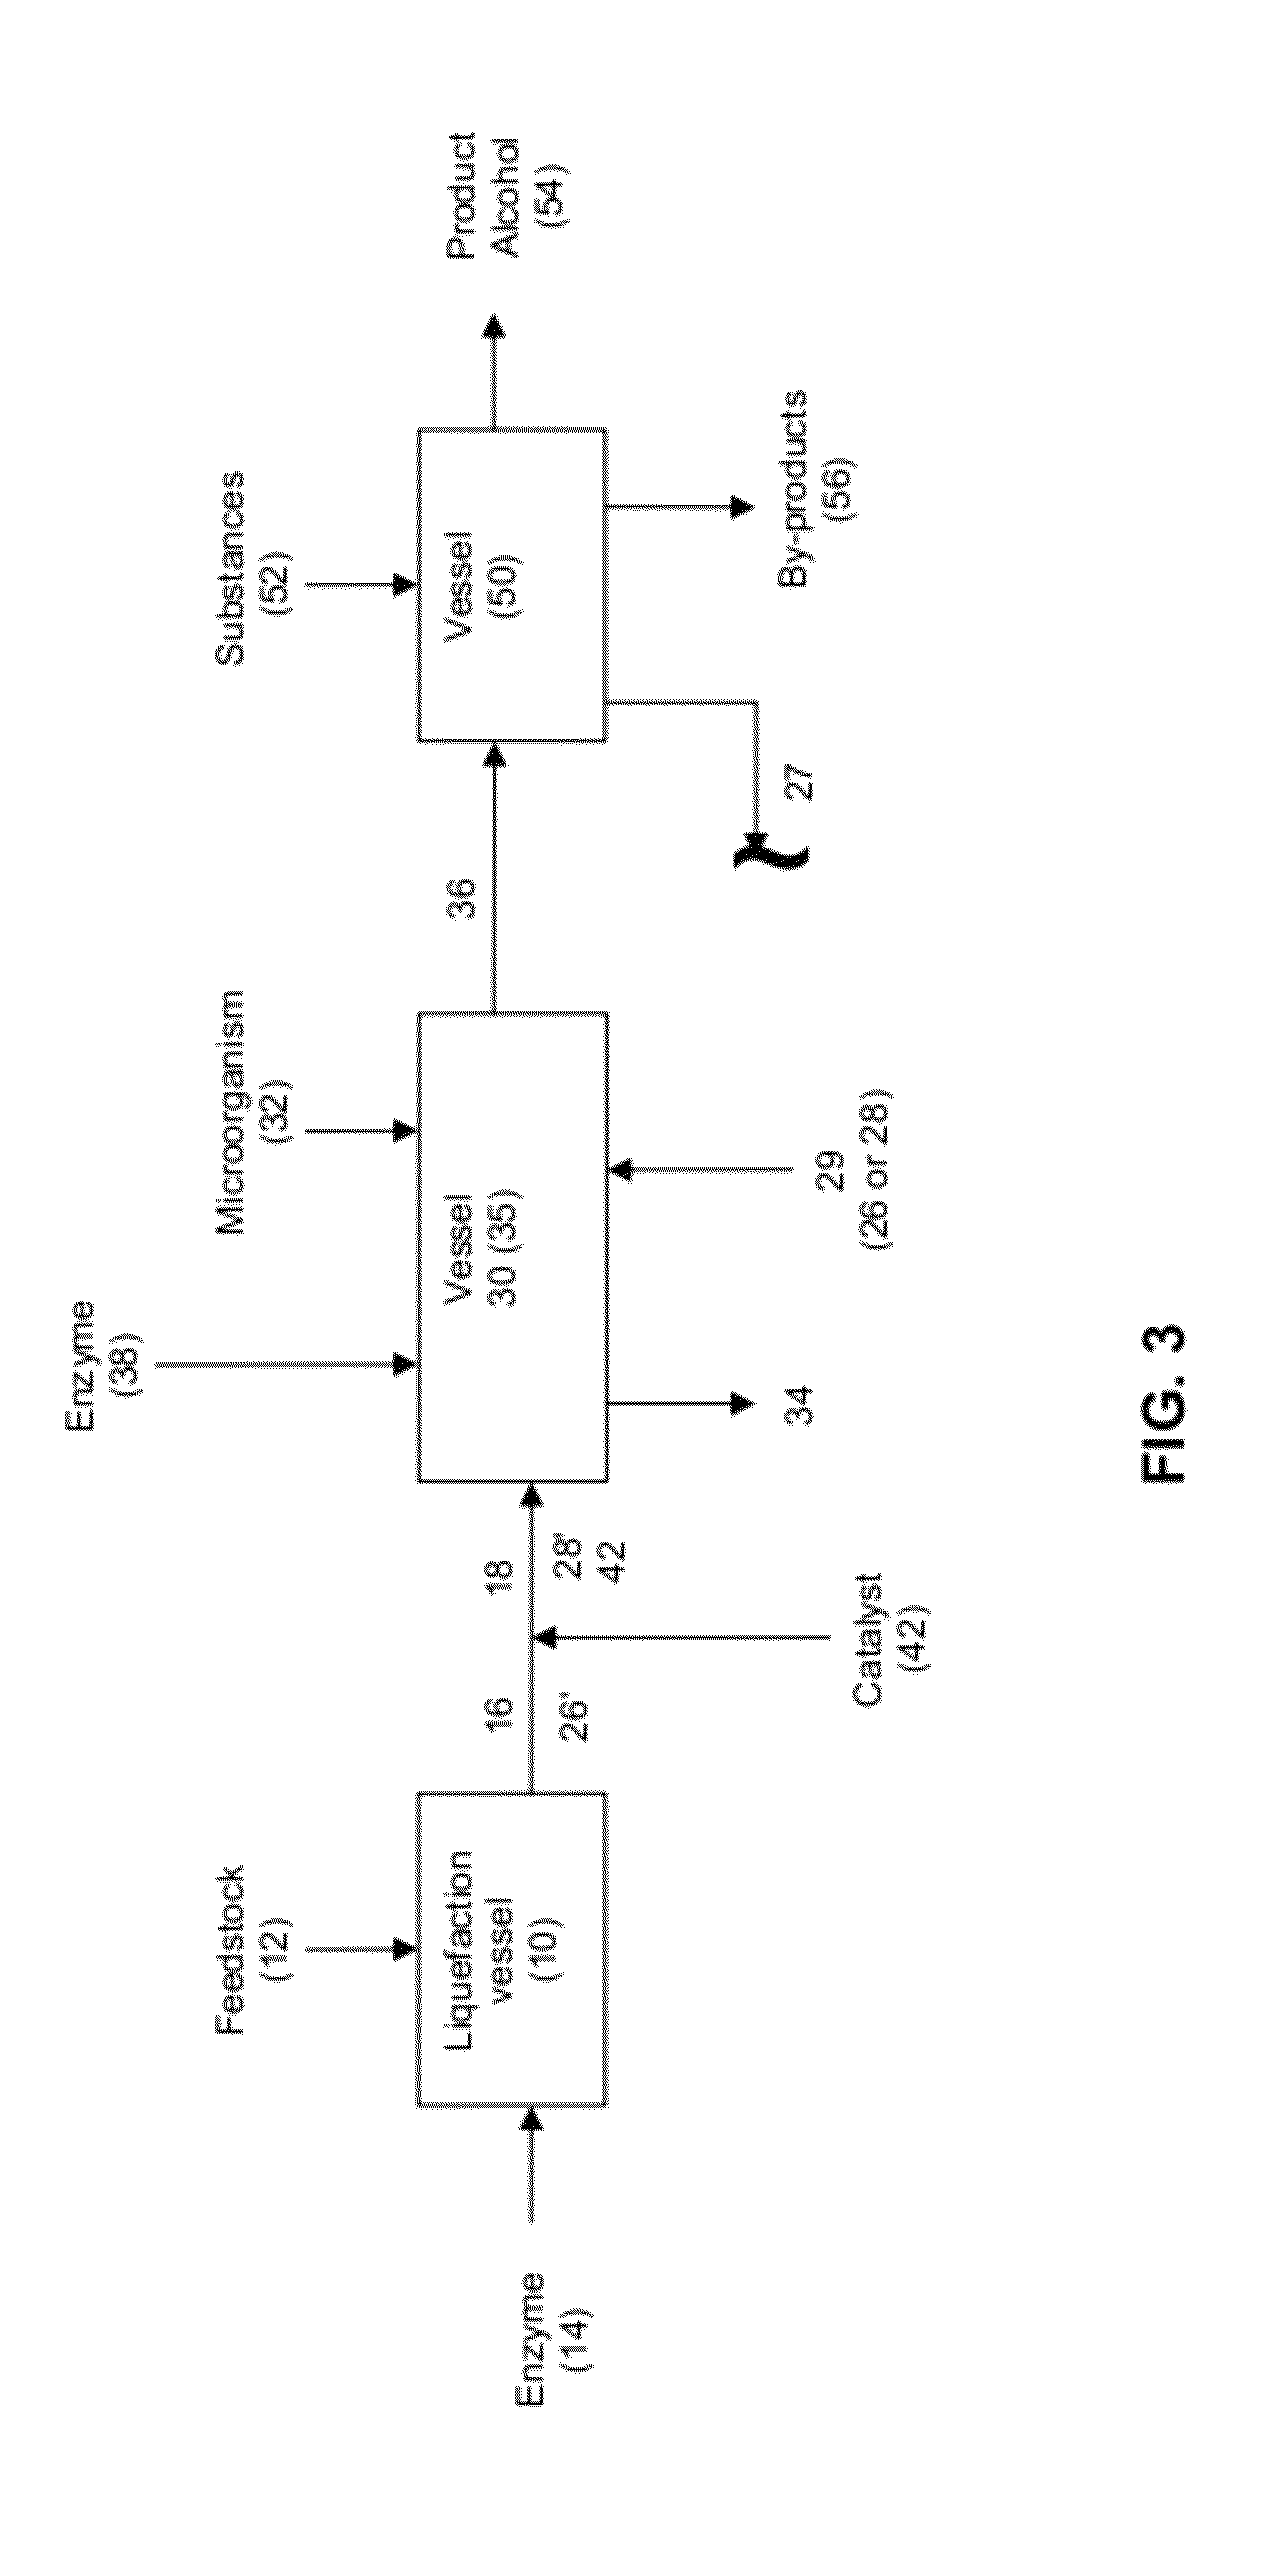 Production of alcohol esters and in situ product removal during alcohol fermentation